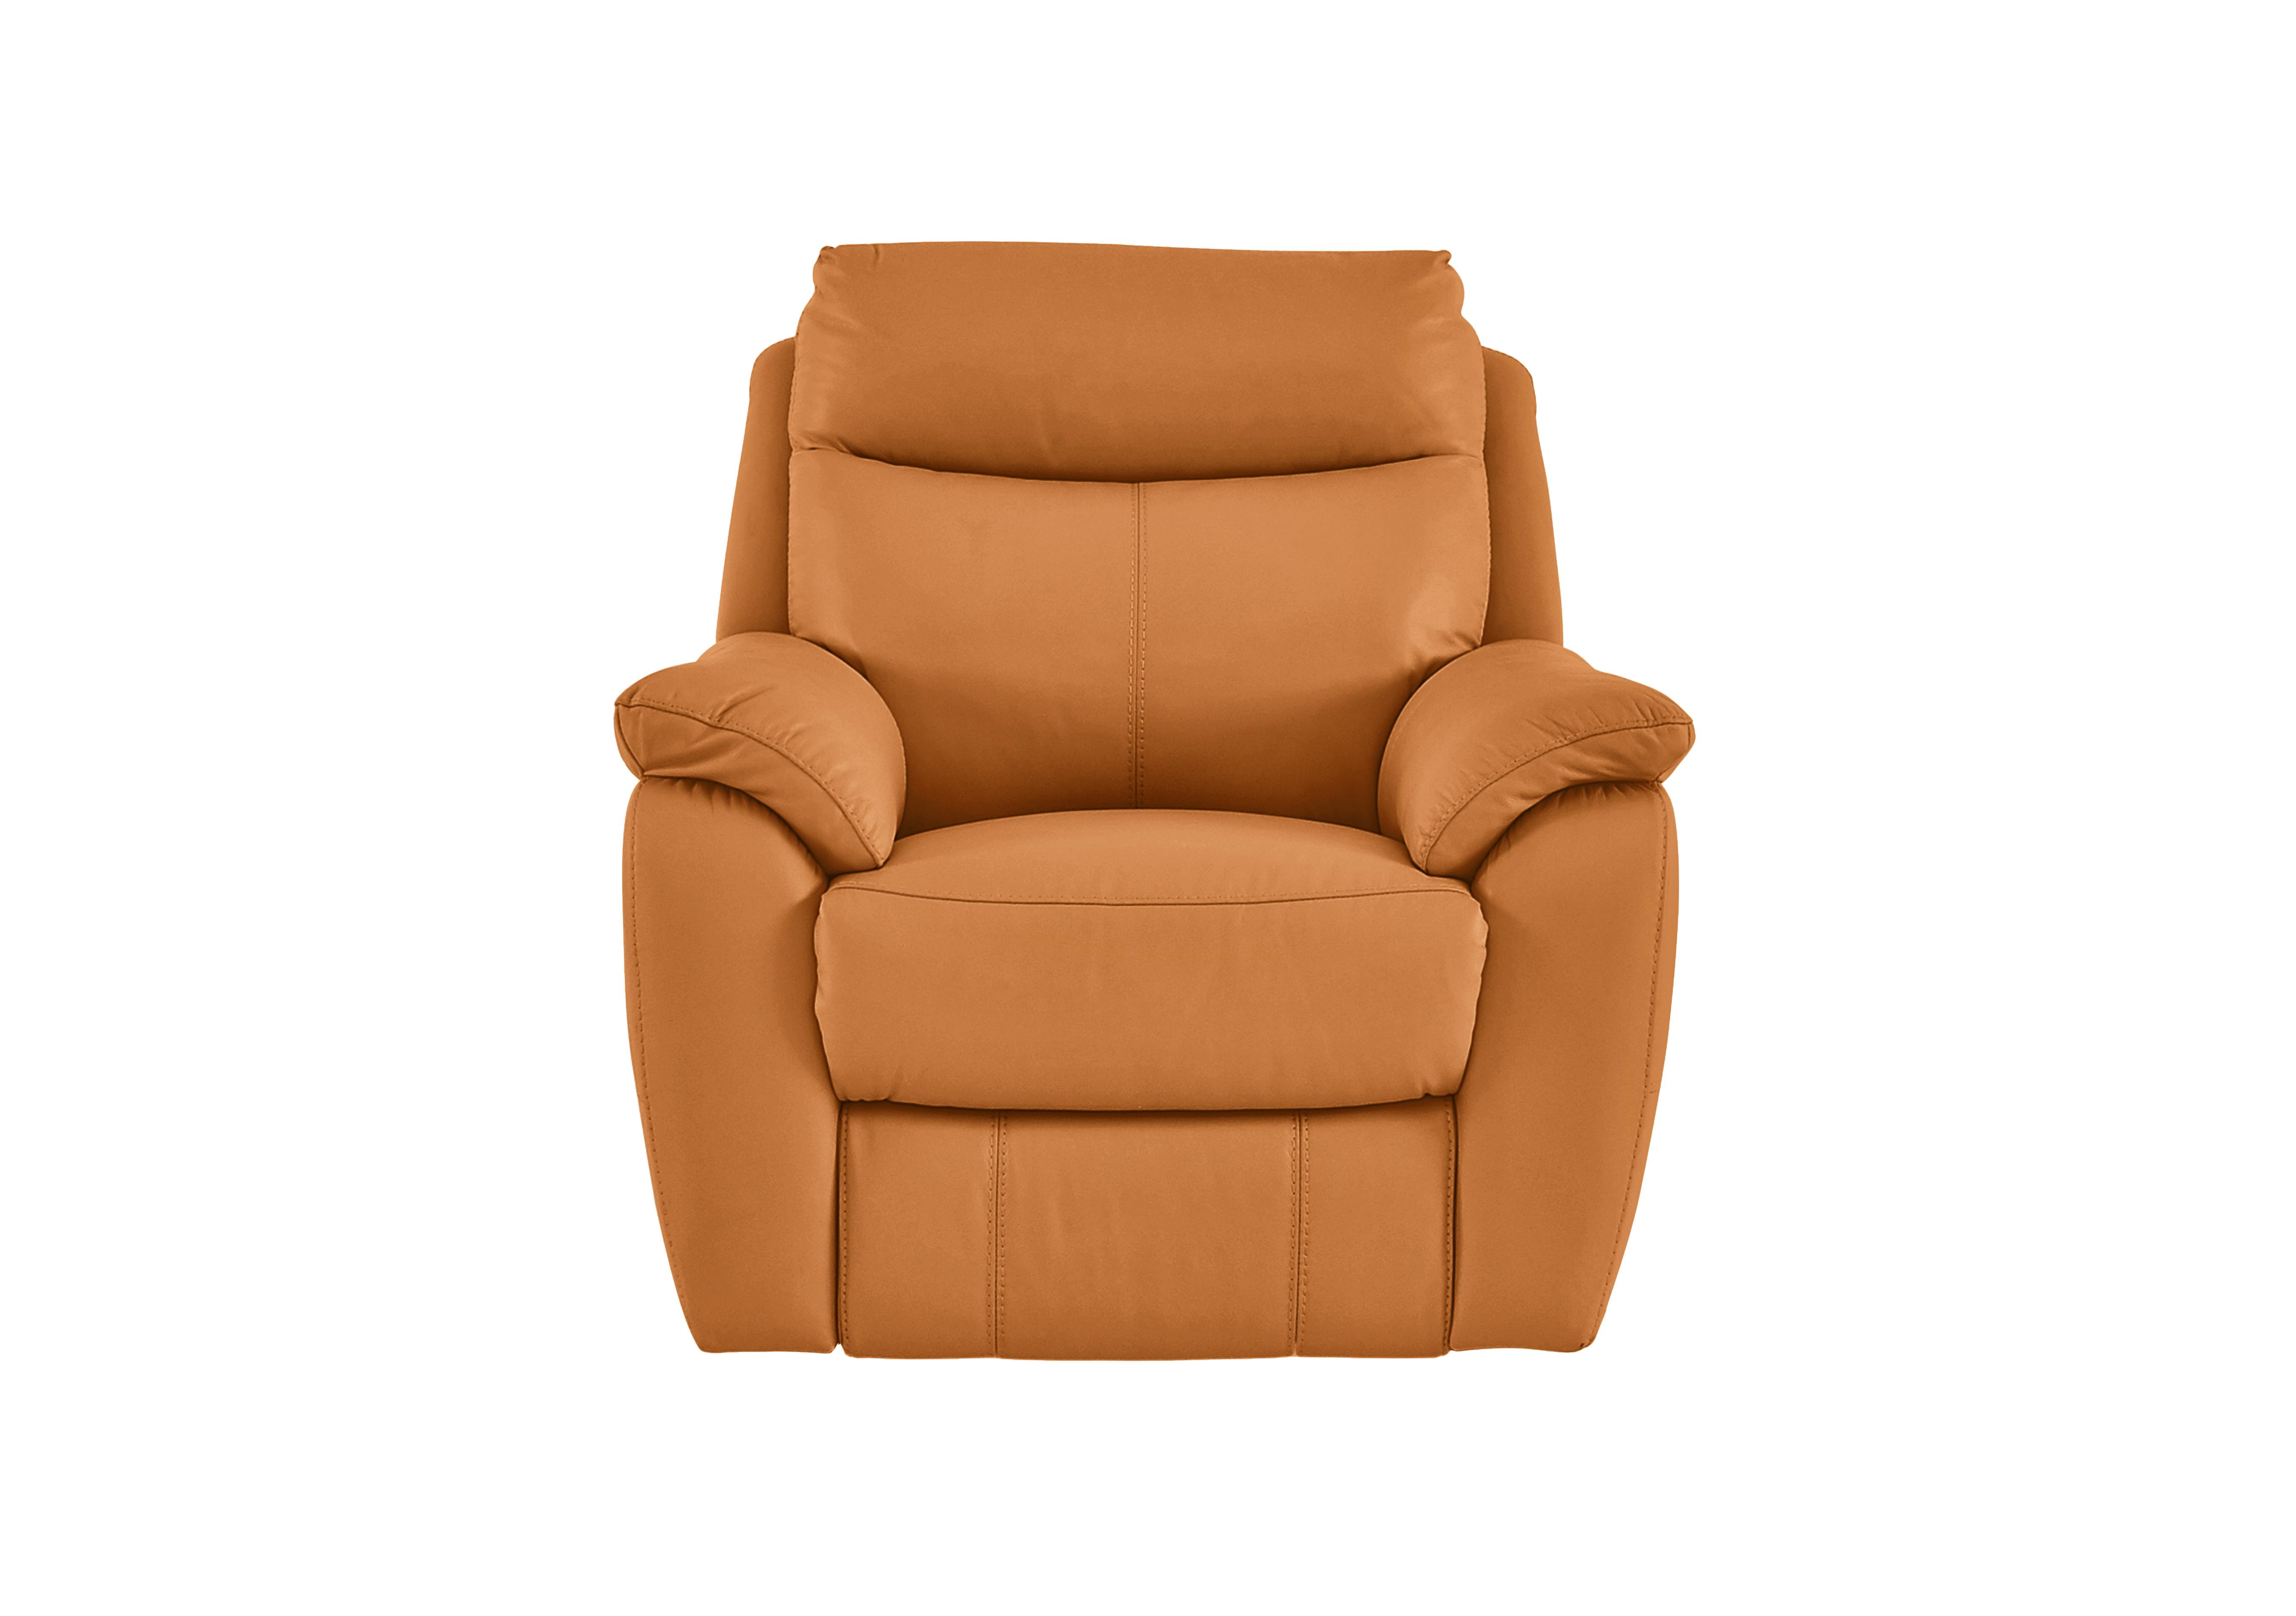 Snug Leather Armchair in Bv-335e Honey Yellow on Furniture Village